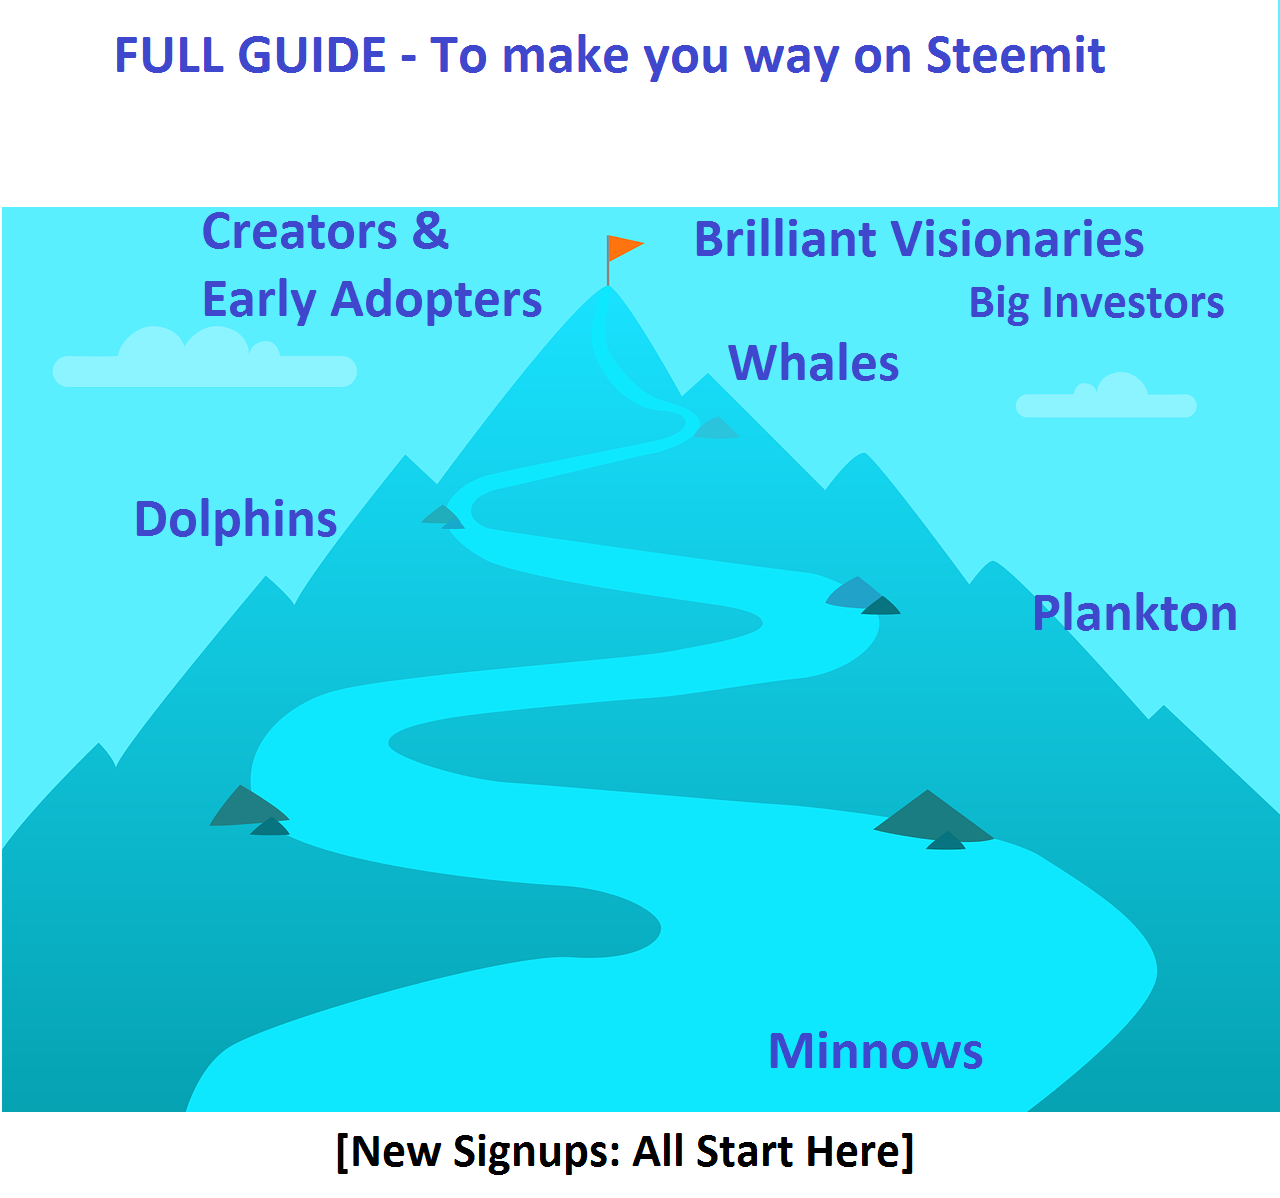 Full 11 Chapter Steemit Guide to make your way on Steem - Succesful.png